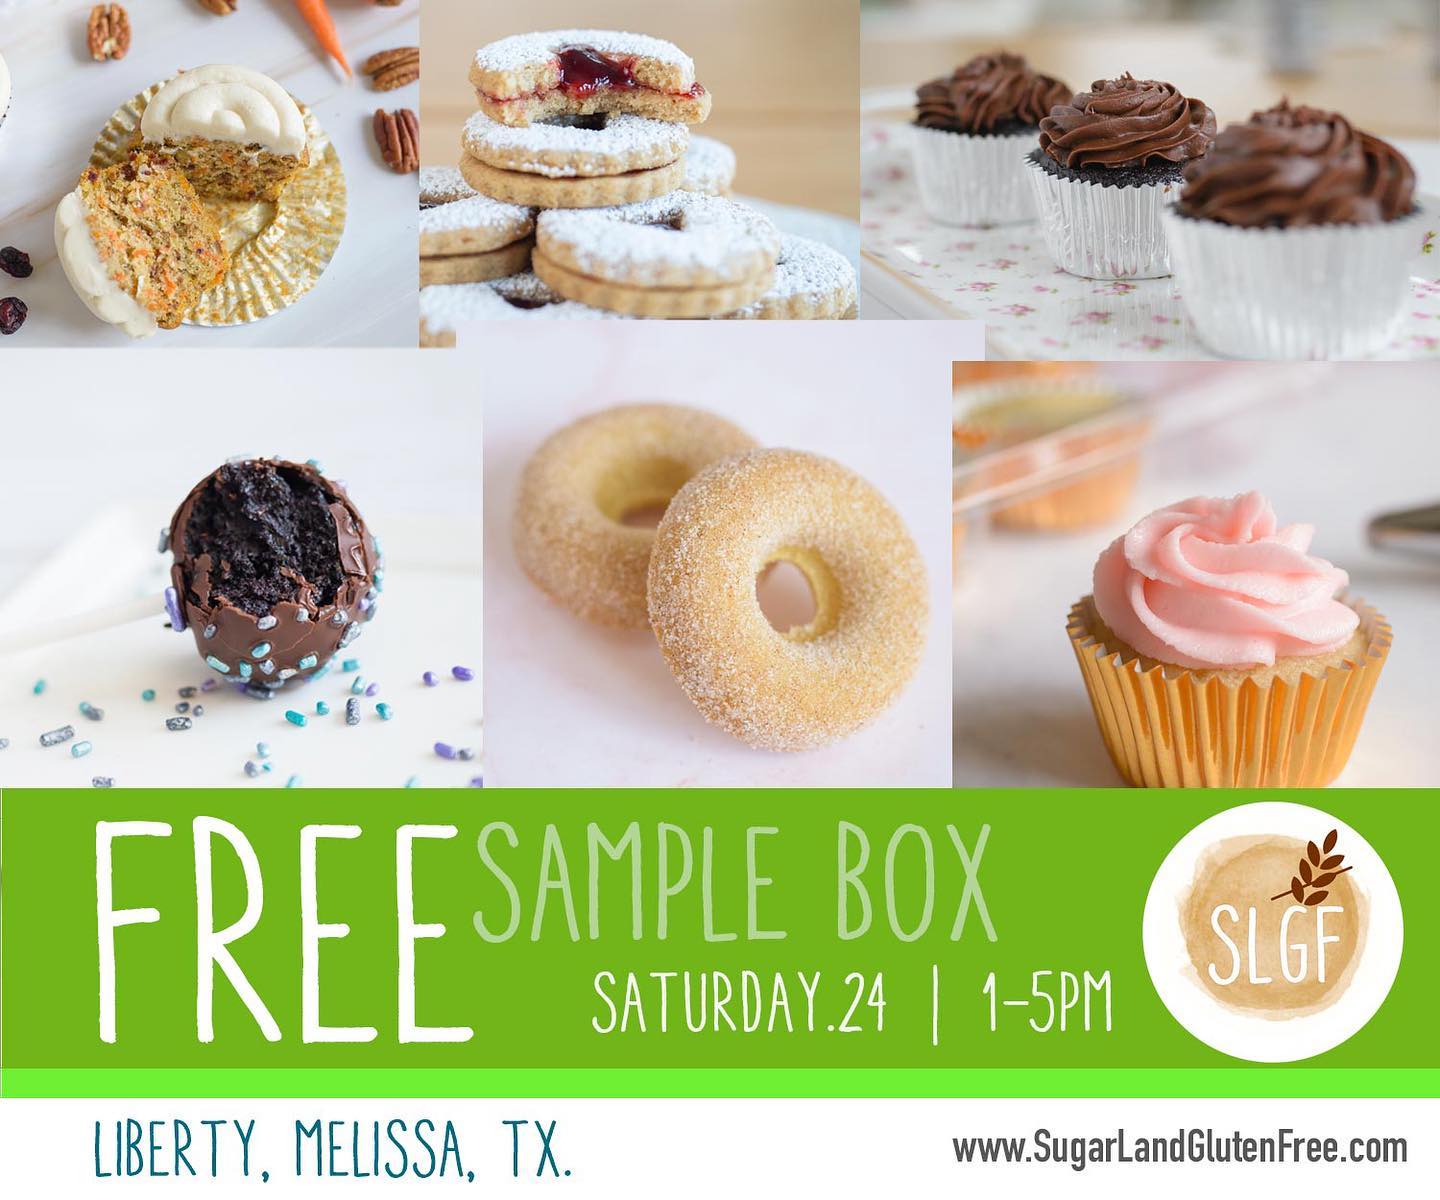 Sold OUT (Soooooo fast)!!! 
Thank you for being interested in the sample box, the pick-up date is Saturday 09 / 24 between 1-5 p.m.

Once you place the order on my website (link in the bio) you will receive an email with the address to pick it up. 
#sugarlandglutenfree #glutenfreesugarland #dairyfree #glutenfreebakery #bakery #glutenfree #glutenfreedallas #glutenfreediet #gluten_free #melissatx #dallas #mckinneytx #dallasbakery #dallasbaker #glutenfreedallas #melissaglutenfree #celiac #celiacdisease #celiacdallas #dallasceliac #glutenfreerecipes #glutenfreefoods #glutenfreetasty #cakeglutenfree #vegancake #vegancakes